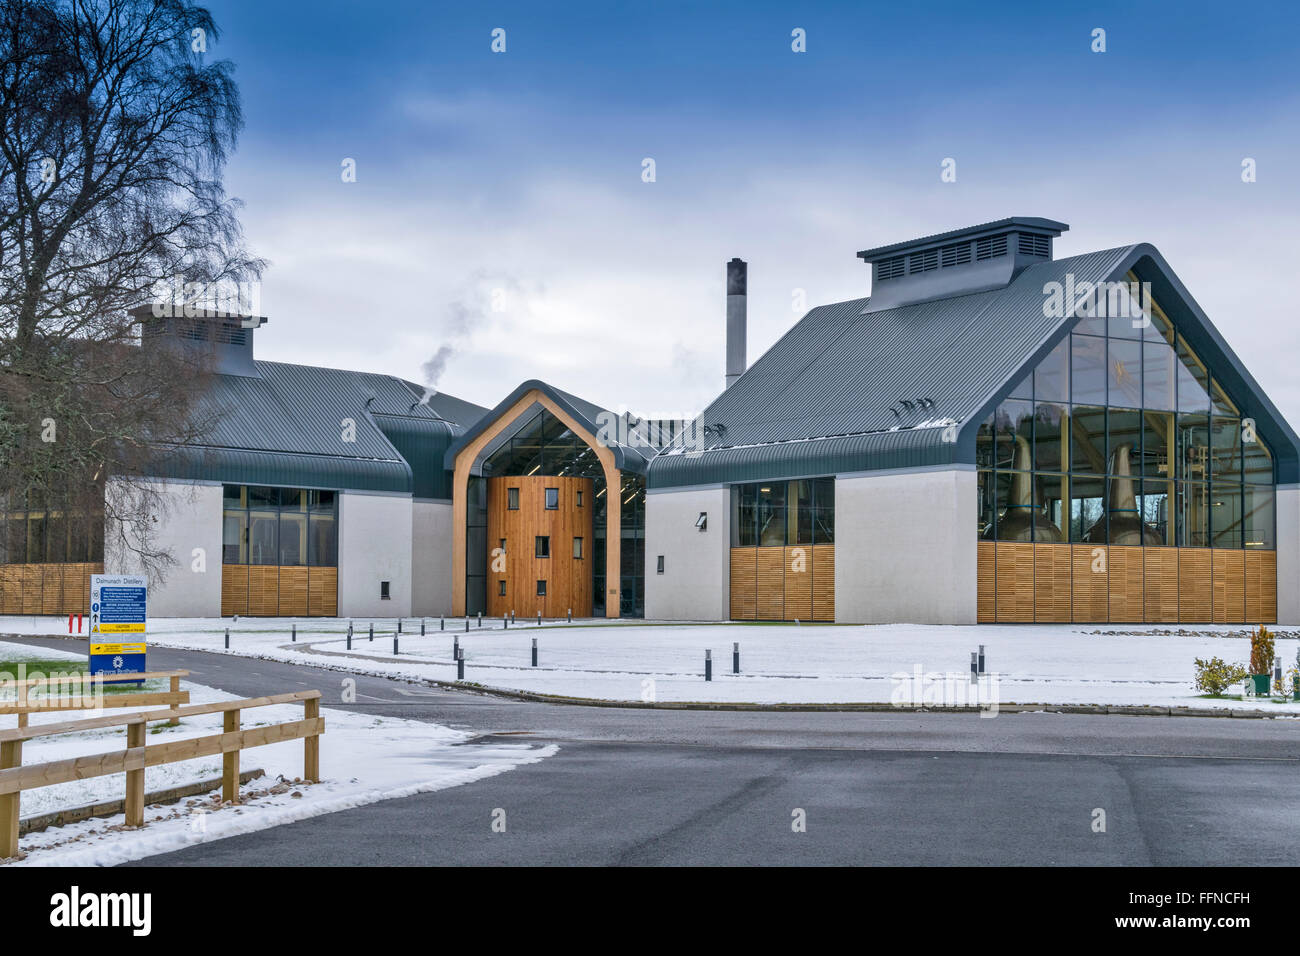 DALMUNACH A NEW AND MODERN WHISKY DISTILLERY AT CARRON SPEYSIDE SCOTLAND IN THE SNOW Stock Photo